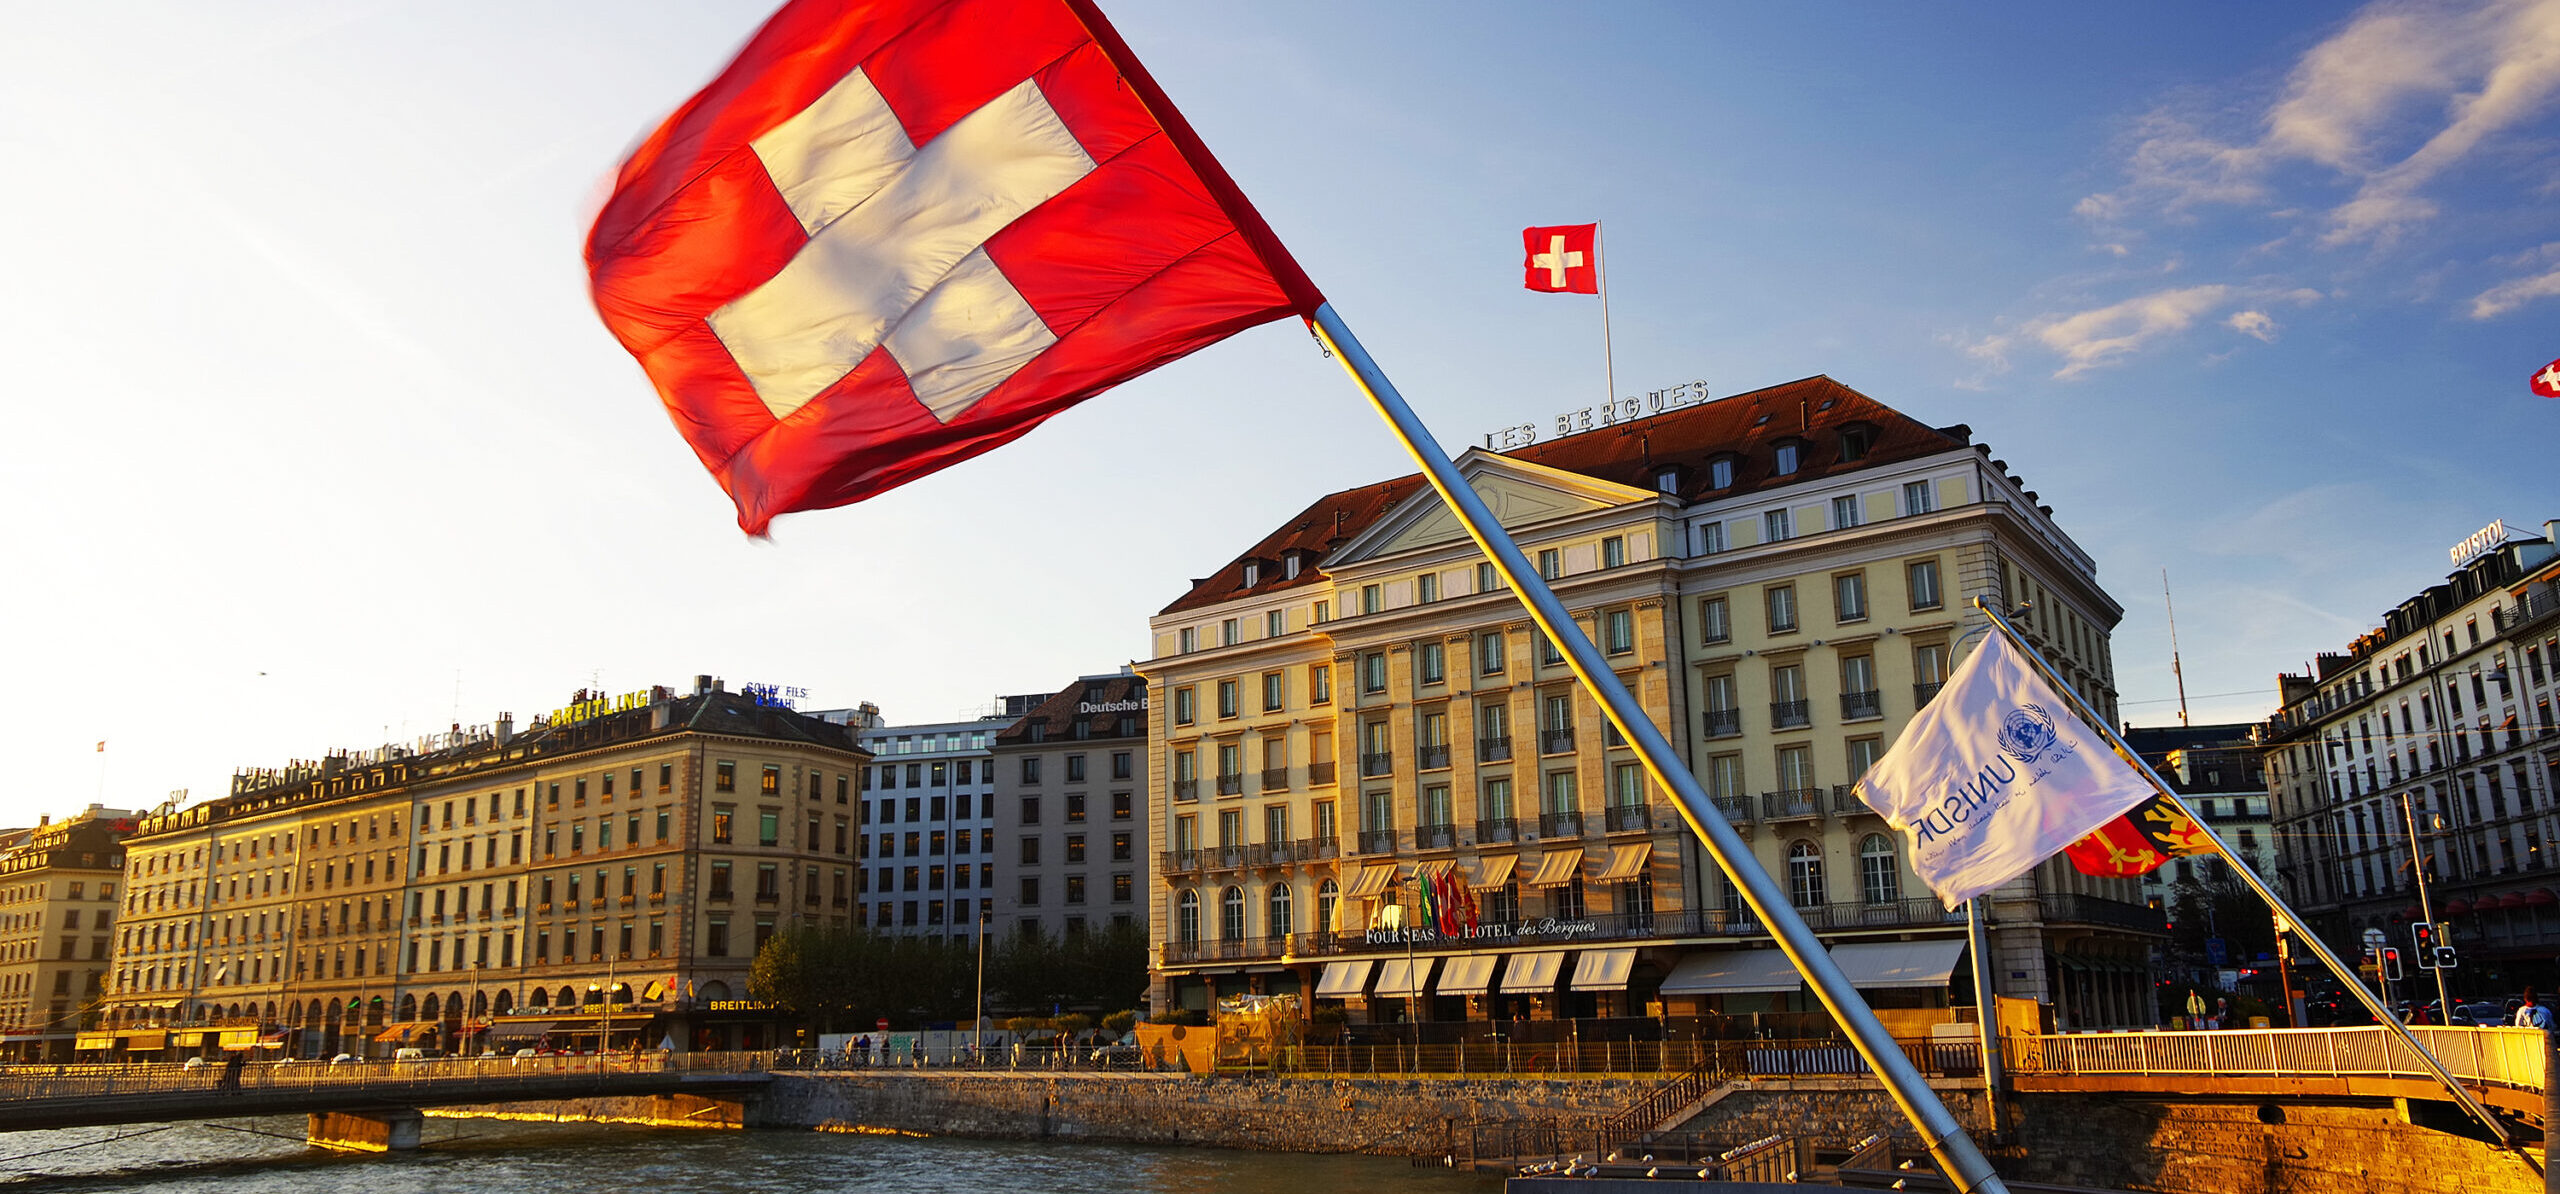 Switzerland reports increase in cyberattacks ahead of Peace Summit